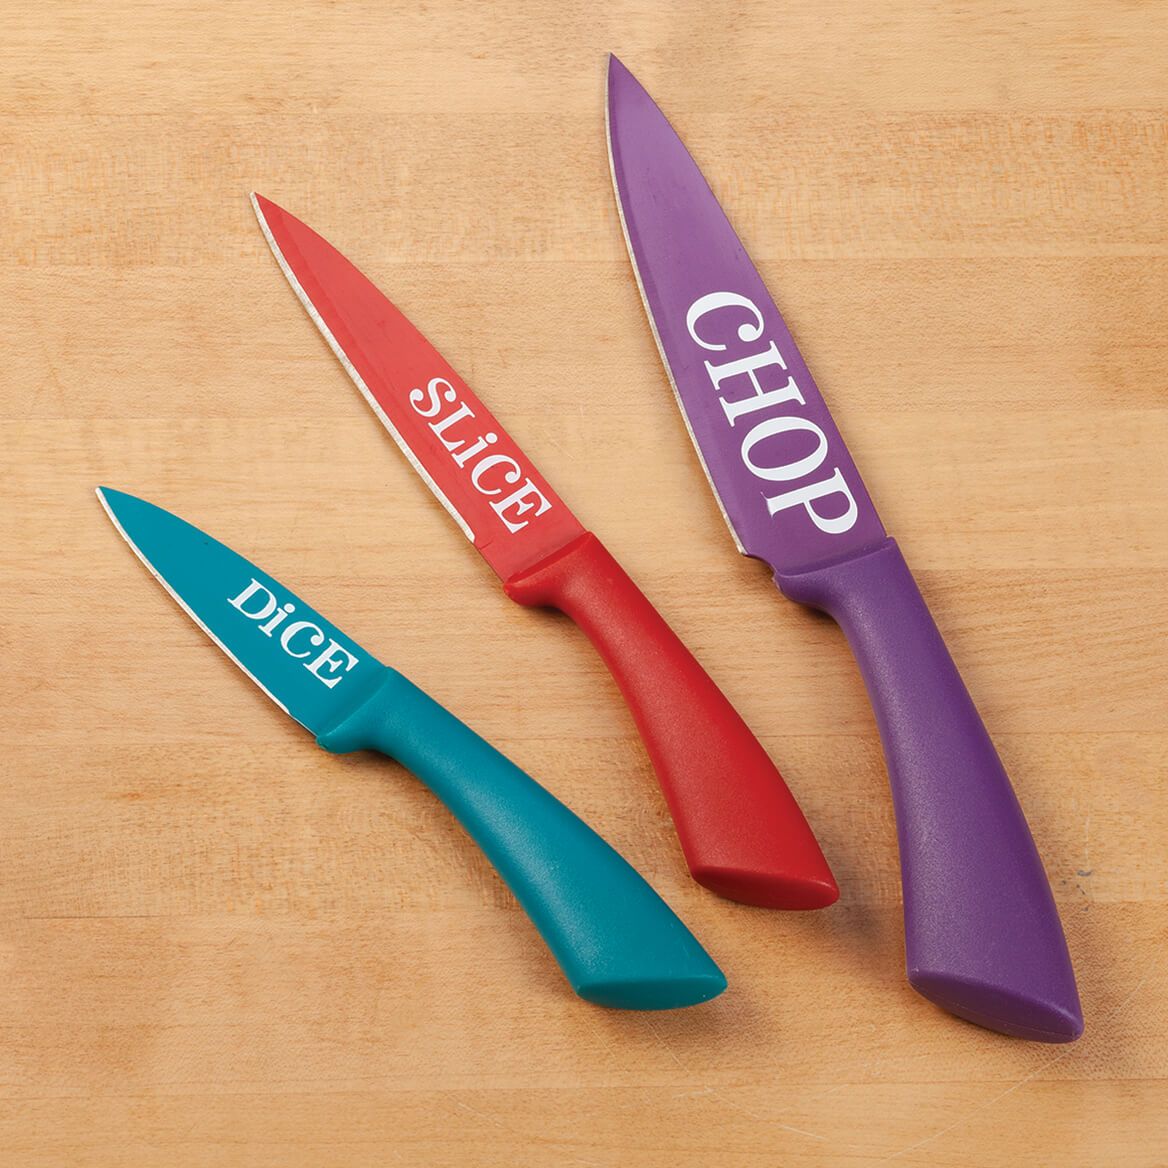 3-pc. Kitchen Chop, Slice and Dice Knife Set by Chef's Pride + '-' + 376860